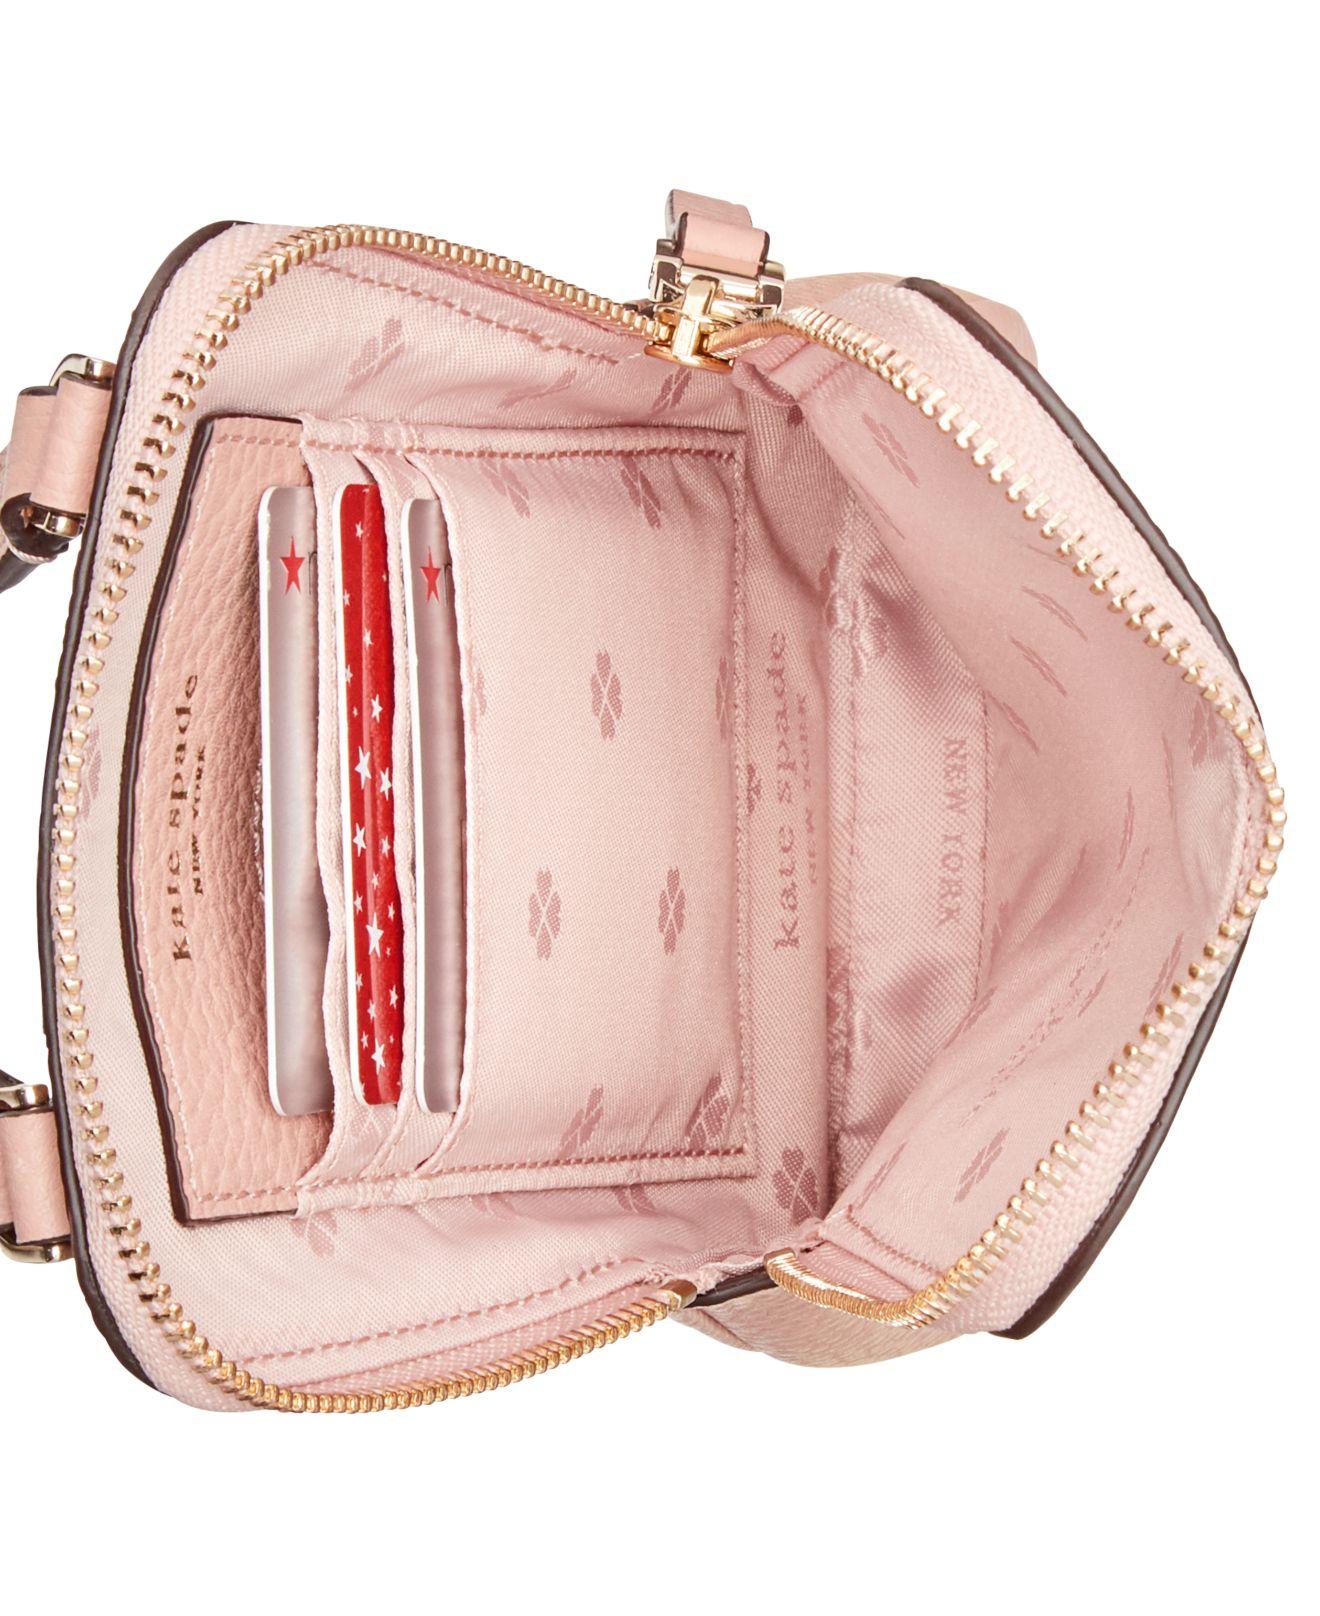 Kate Spade Polly Pebble Leather Phone Crossbody in Pink - Lyst